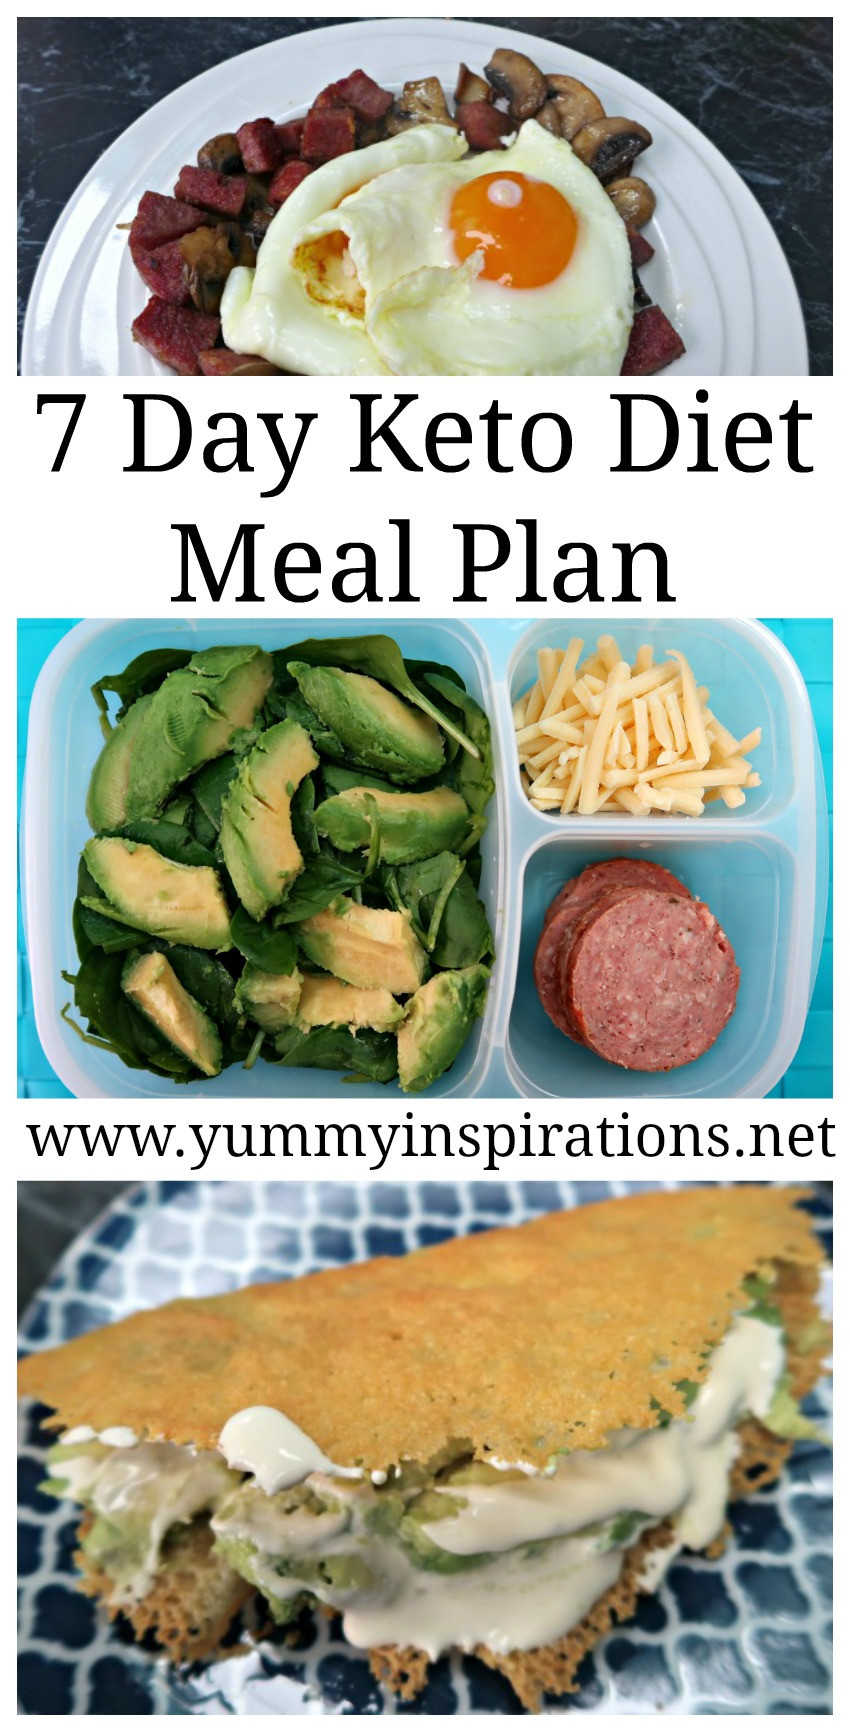 Keto Diet Recipes
 7 Day Keto Diet Meal Plan For Weight Loss Ketogenic Foods